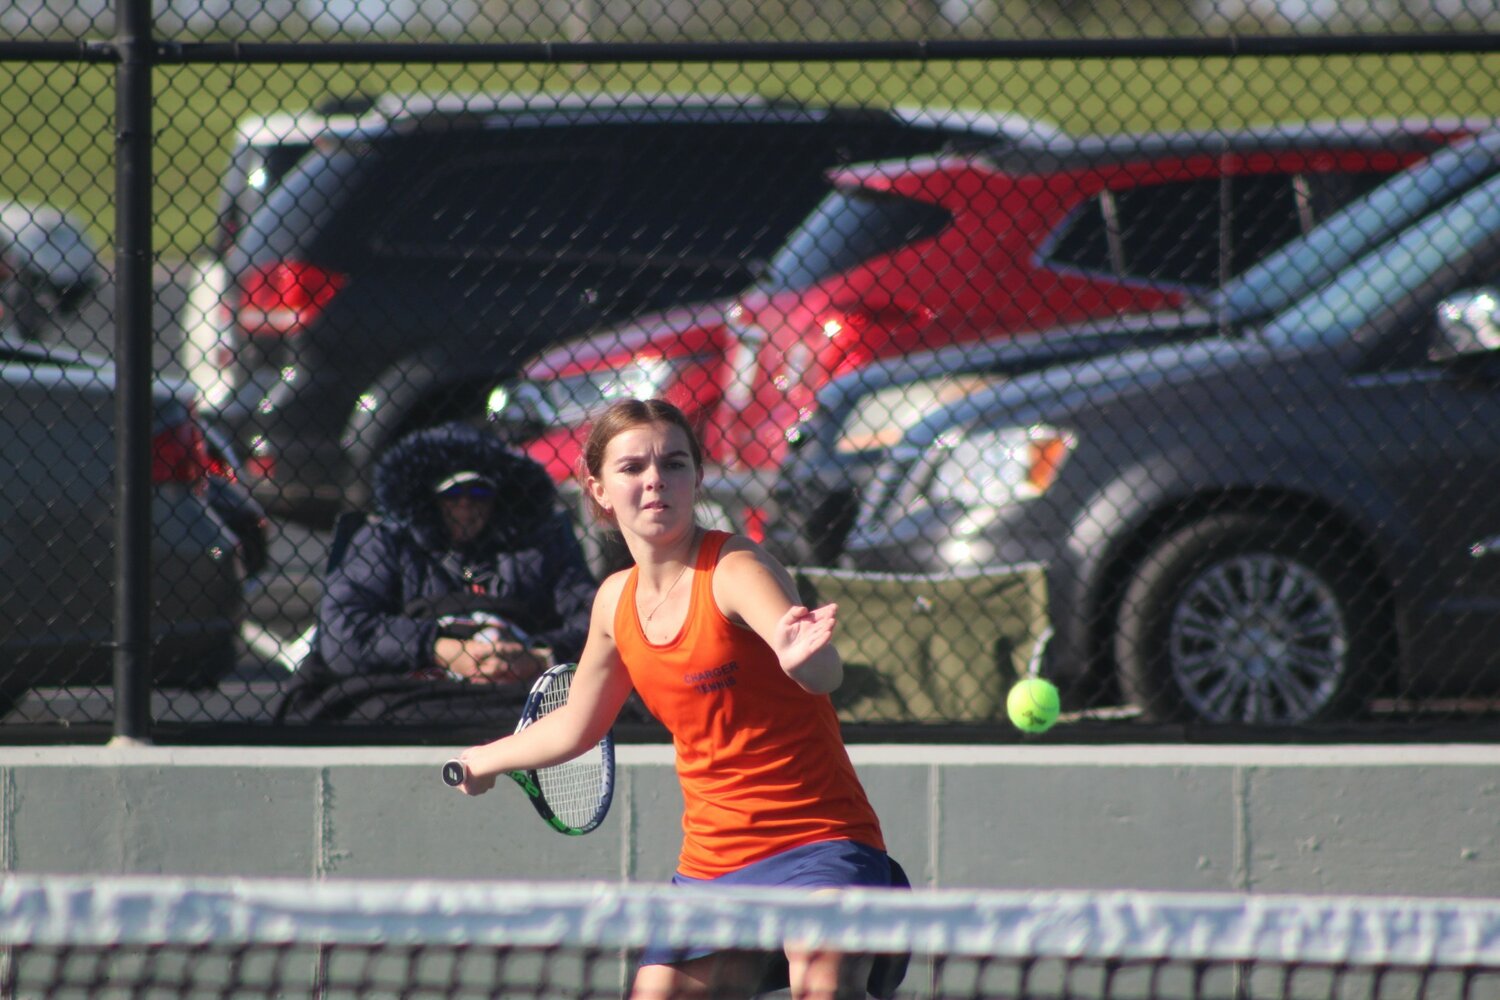 Sydney Neideffer anchors the top of the Charger lineup at one singles.